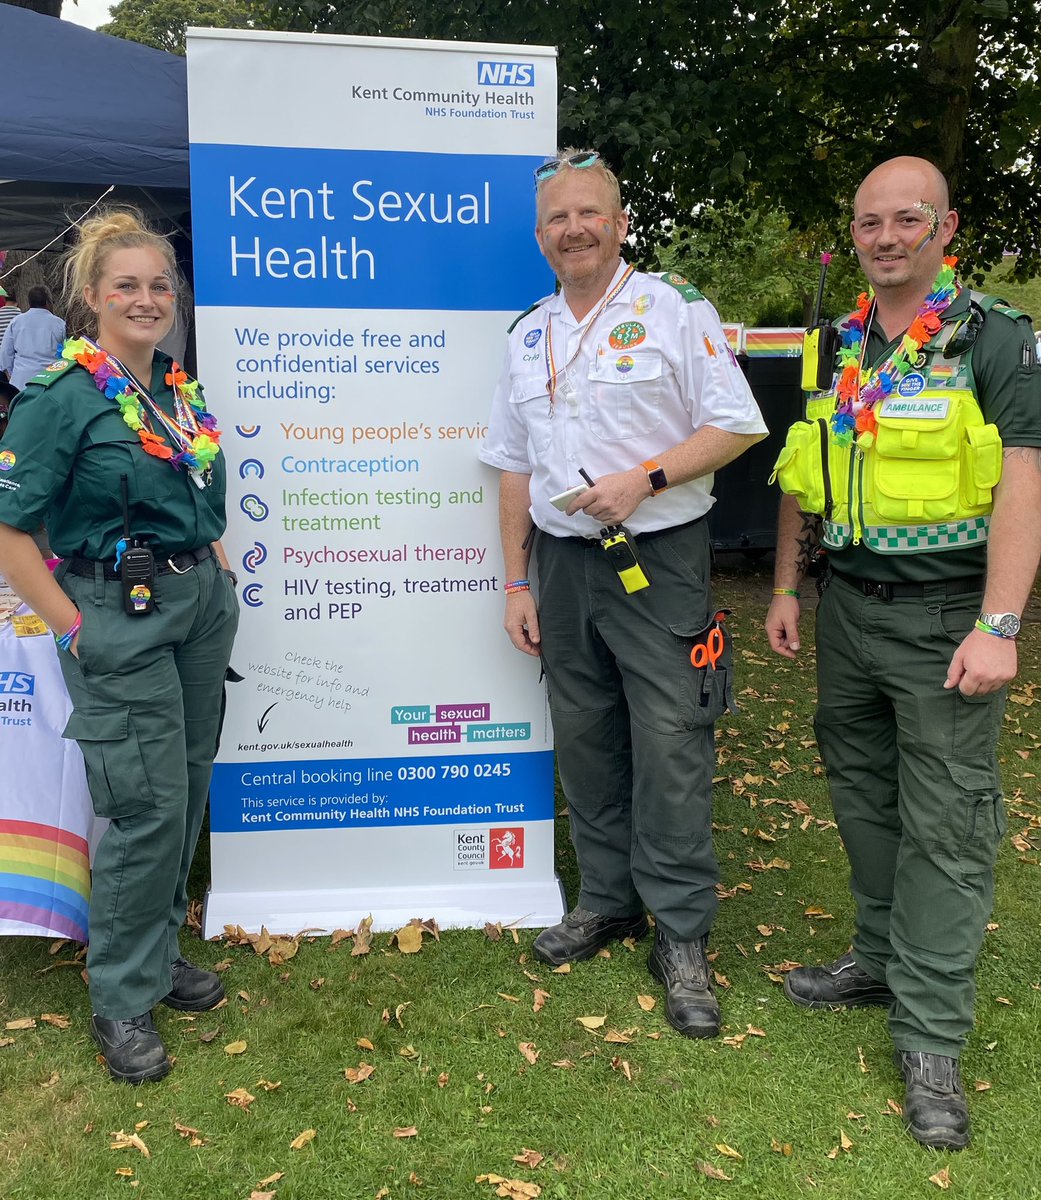 Pride Canterbury 2021 🏳️‍🌈 A lovely day to be at and a lovely day with colleagues, the public and partners #PrideCanterbury #PrideInLondon #Pride2021 #Pride #SexualHealth #KentTogether